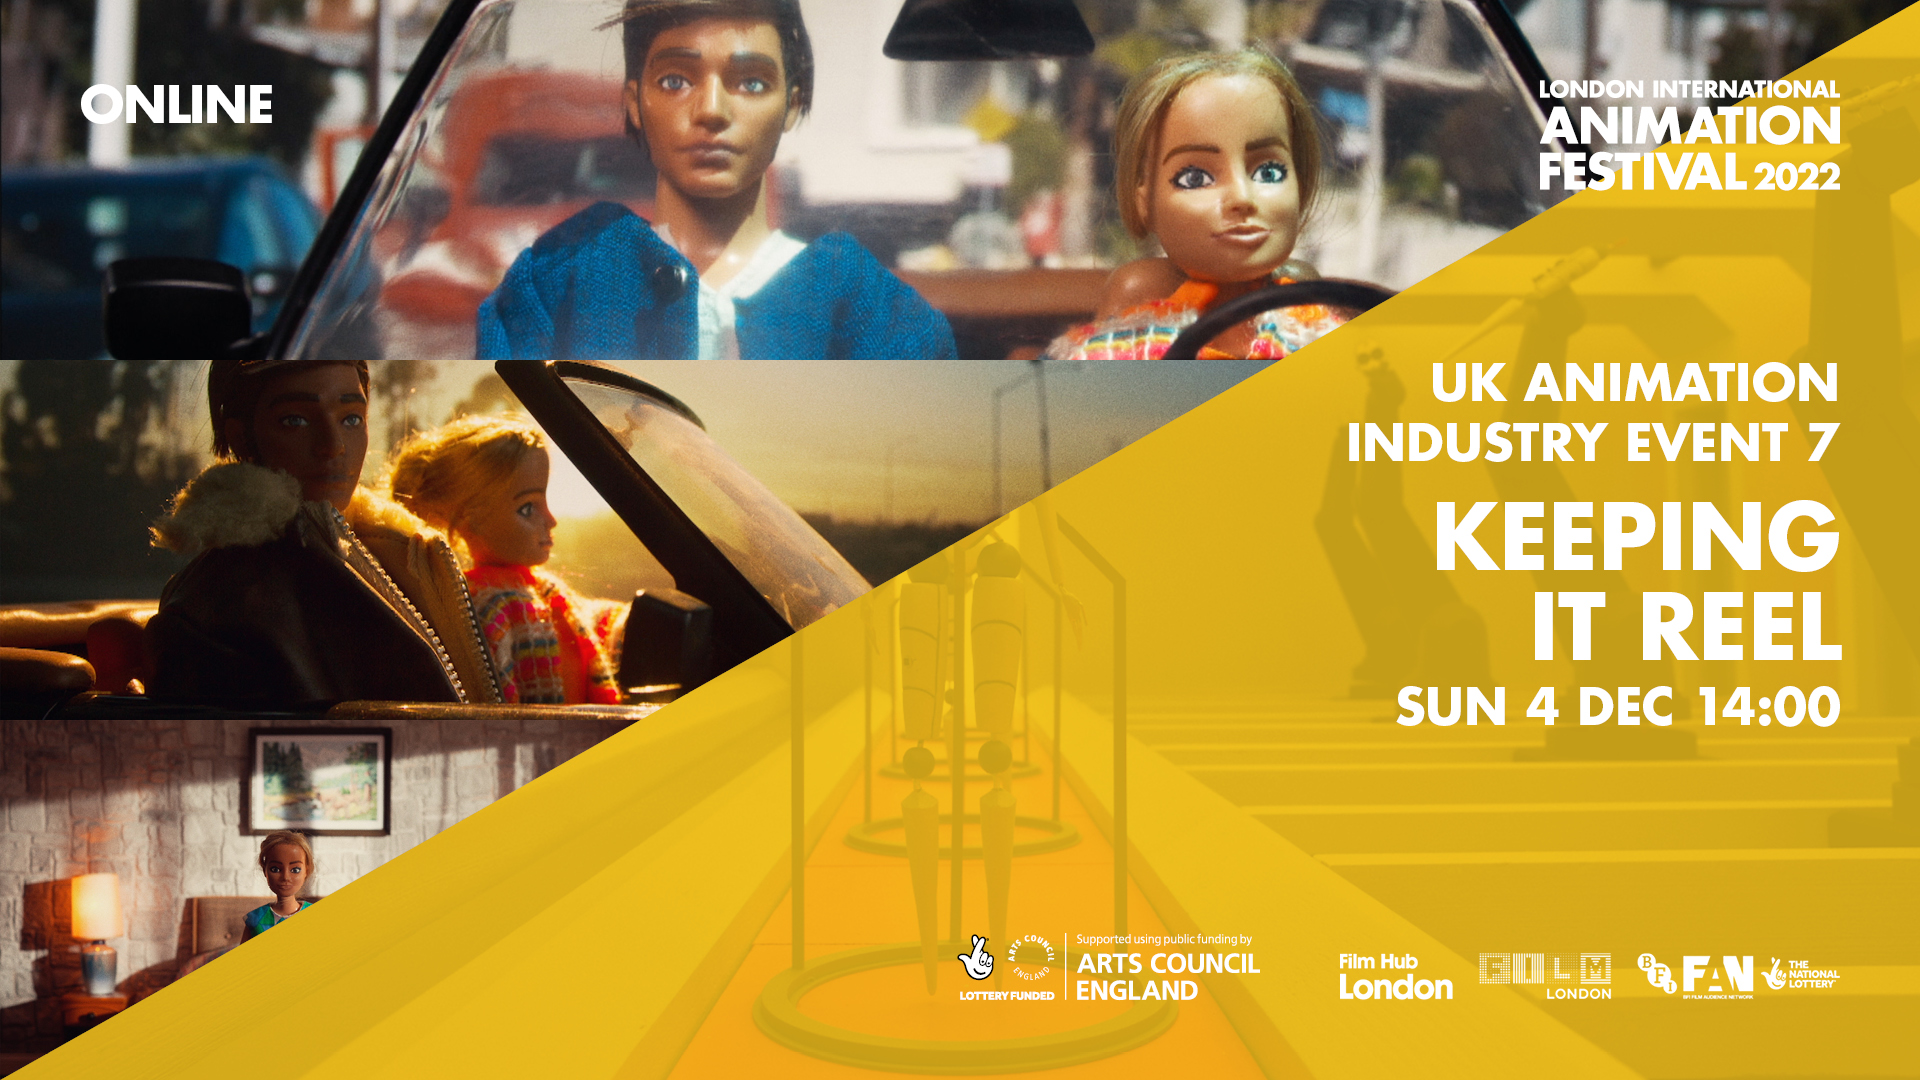 LIAF 2022: UK Animation Industry Event Session 7 - Keeping it Reel